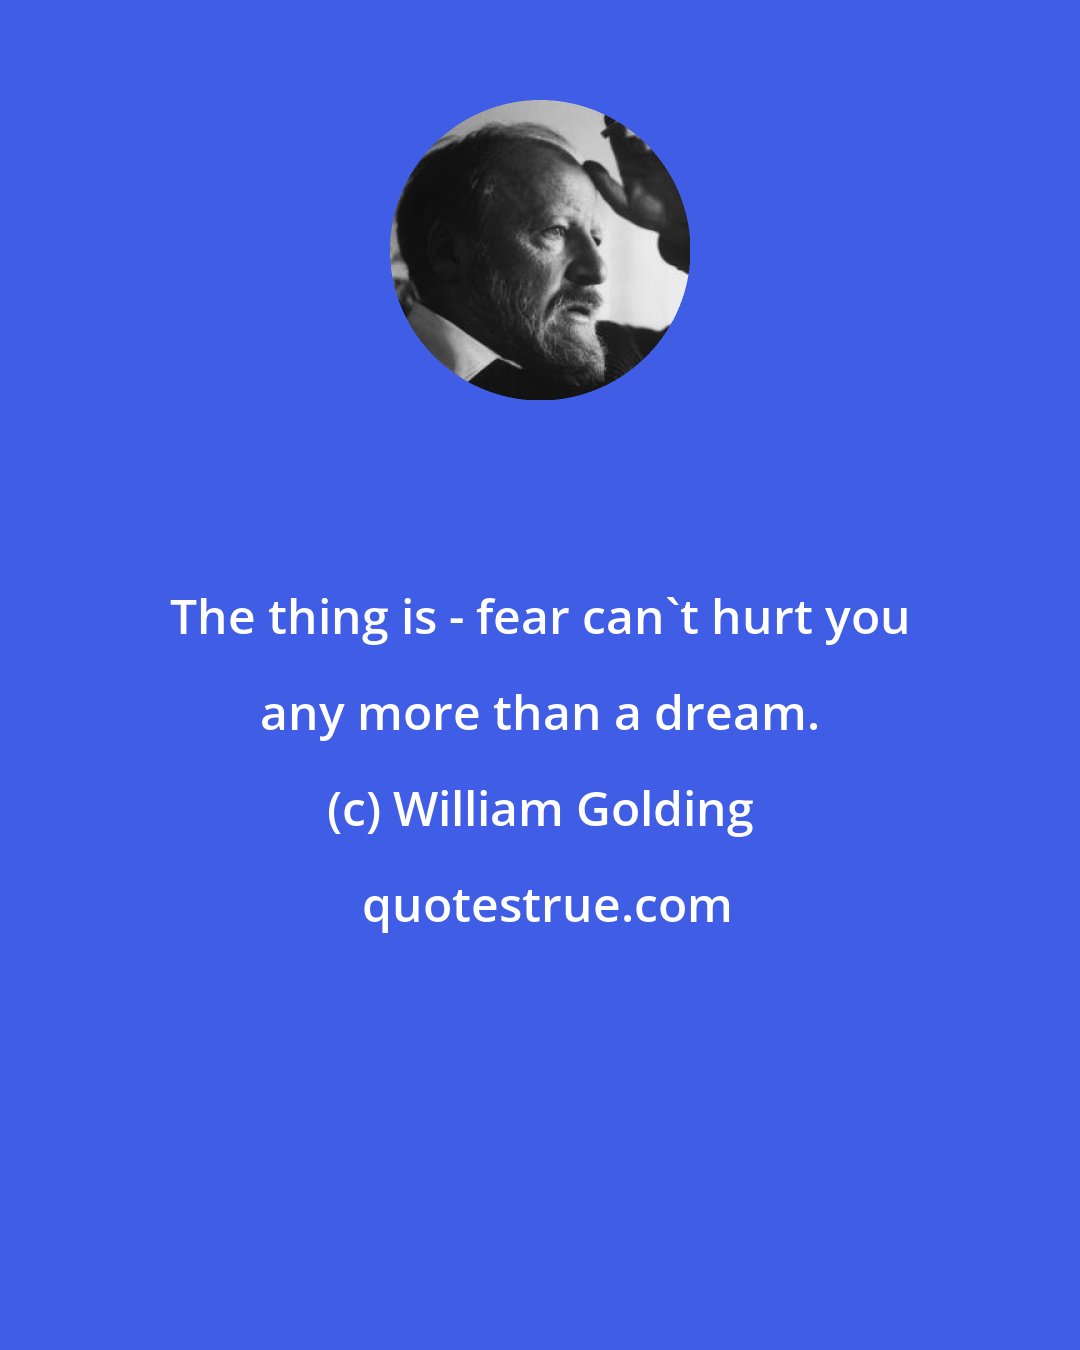 William Golding: The thing is - fear can't hurt you any more than a dream.